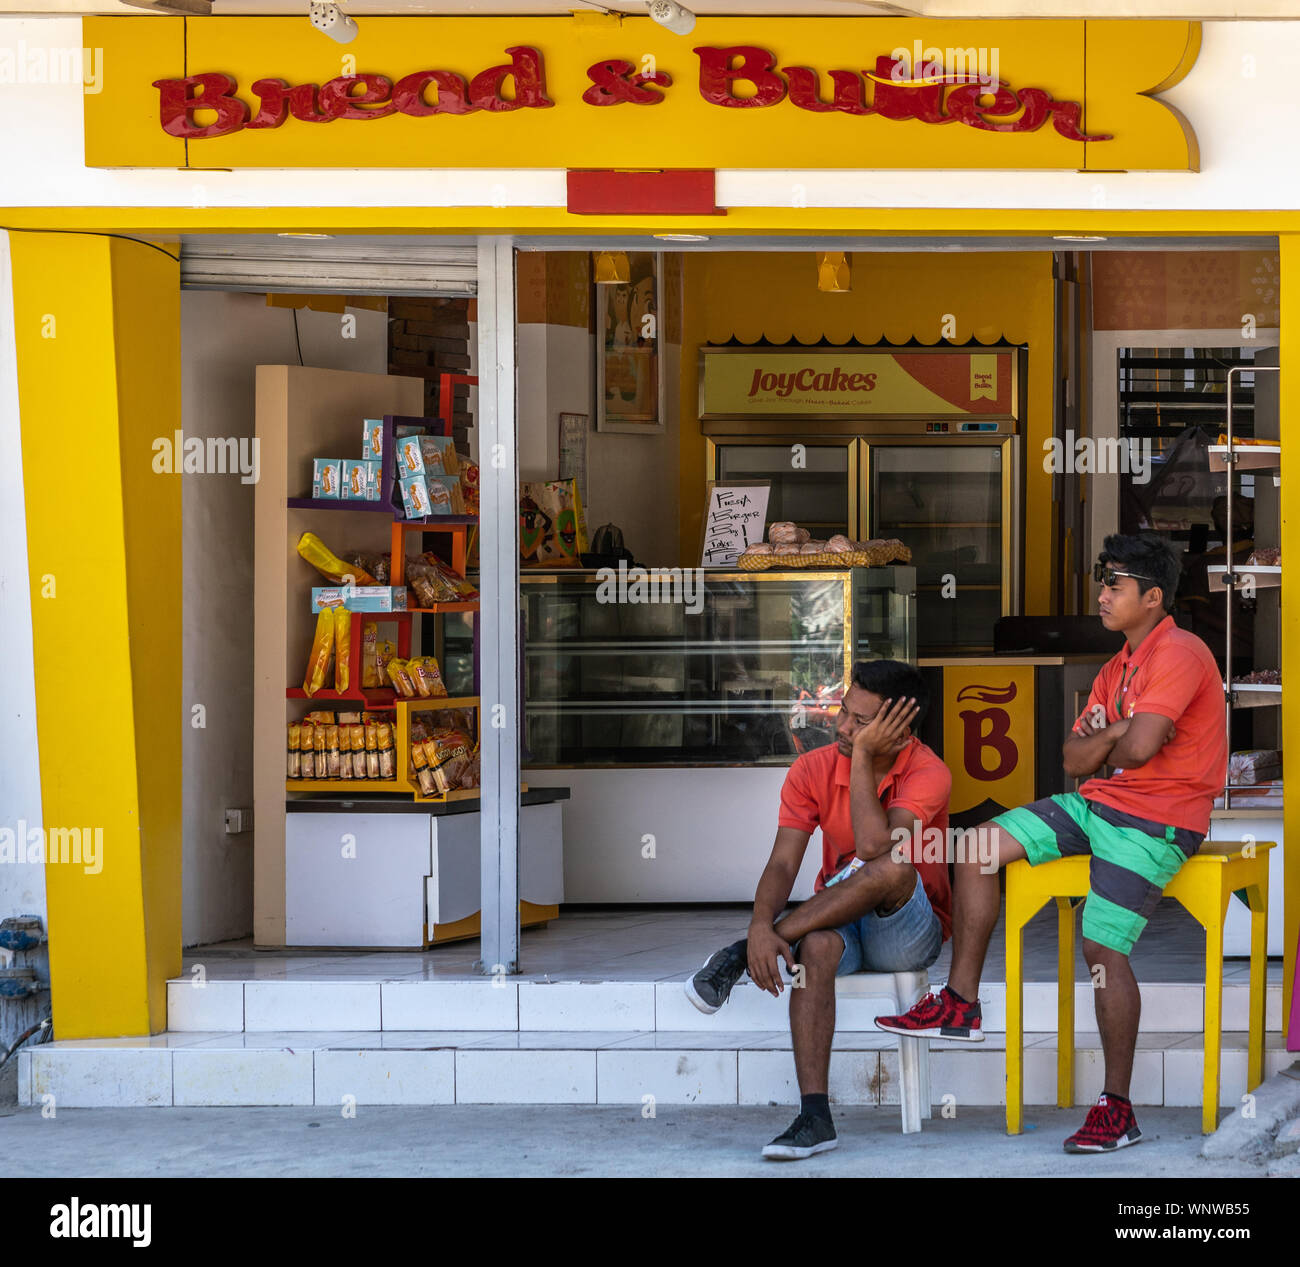 Manoc-Manoc, Boracay Island, Philippines - March 4, 2019: Near Cagban Jetty Port and ferry pier. Bread & Butter bakery shows dominant yellow and white Stock Photo